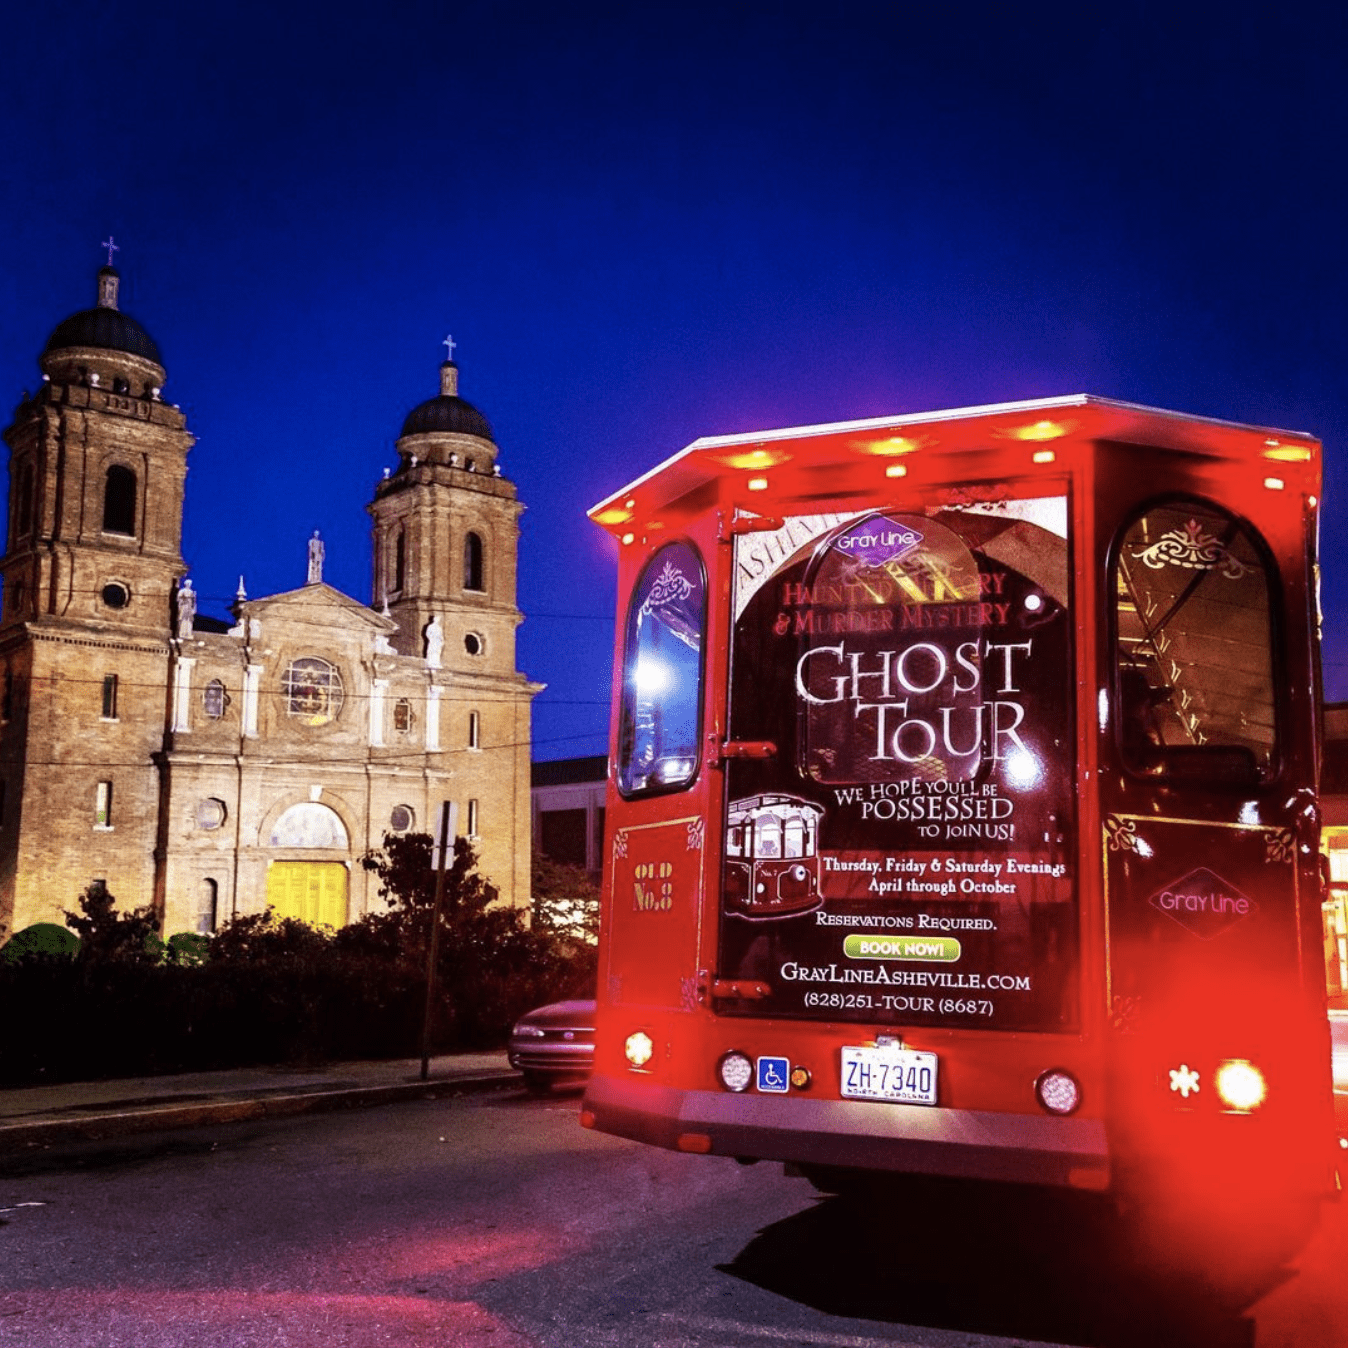 The ghost tour with Gray Line tours takes you for a unique ride around Asheville